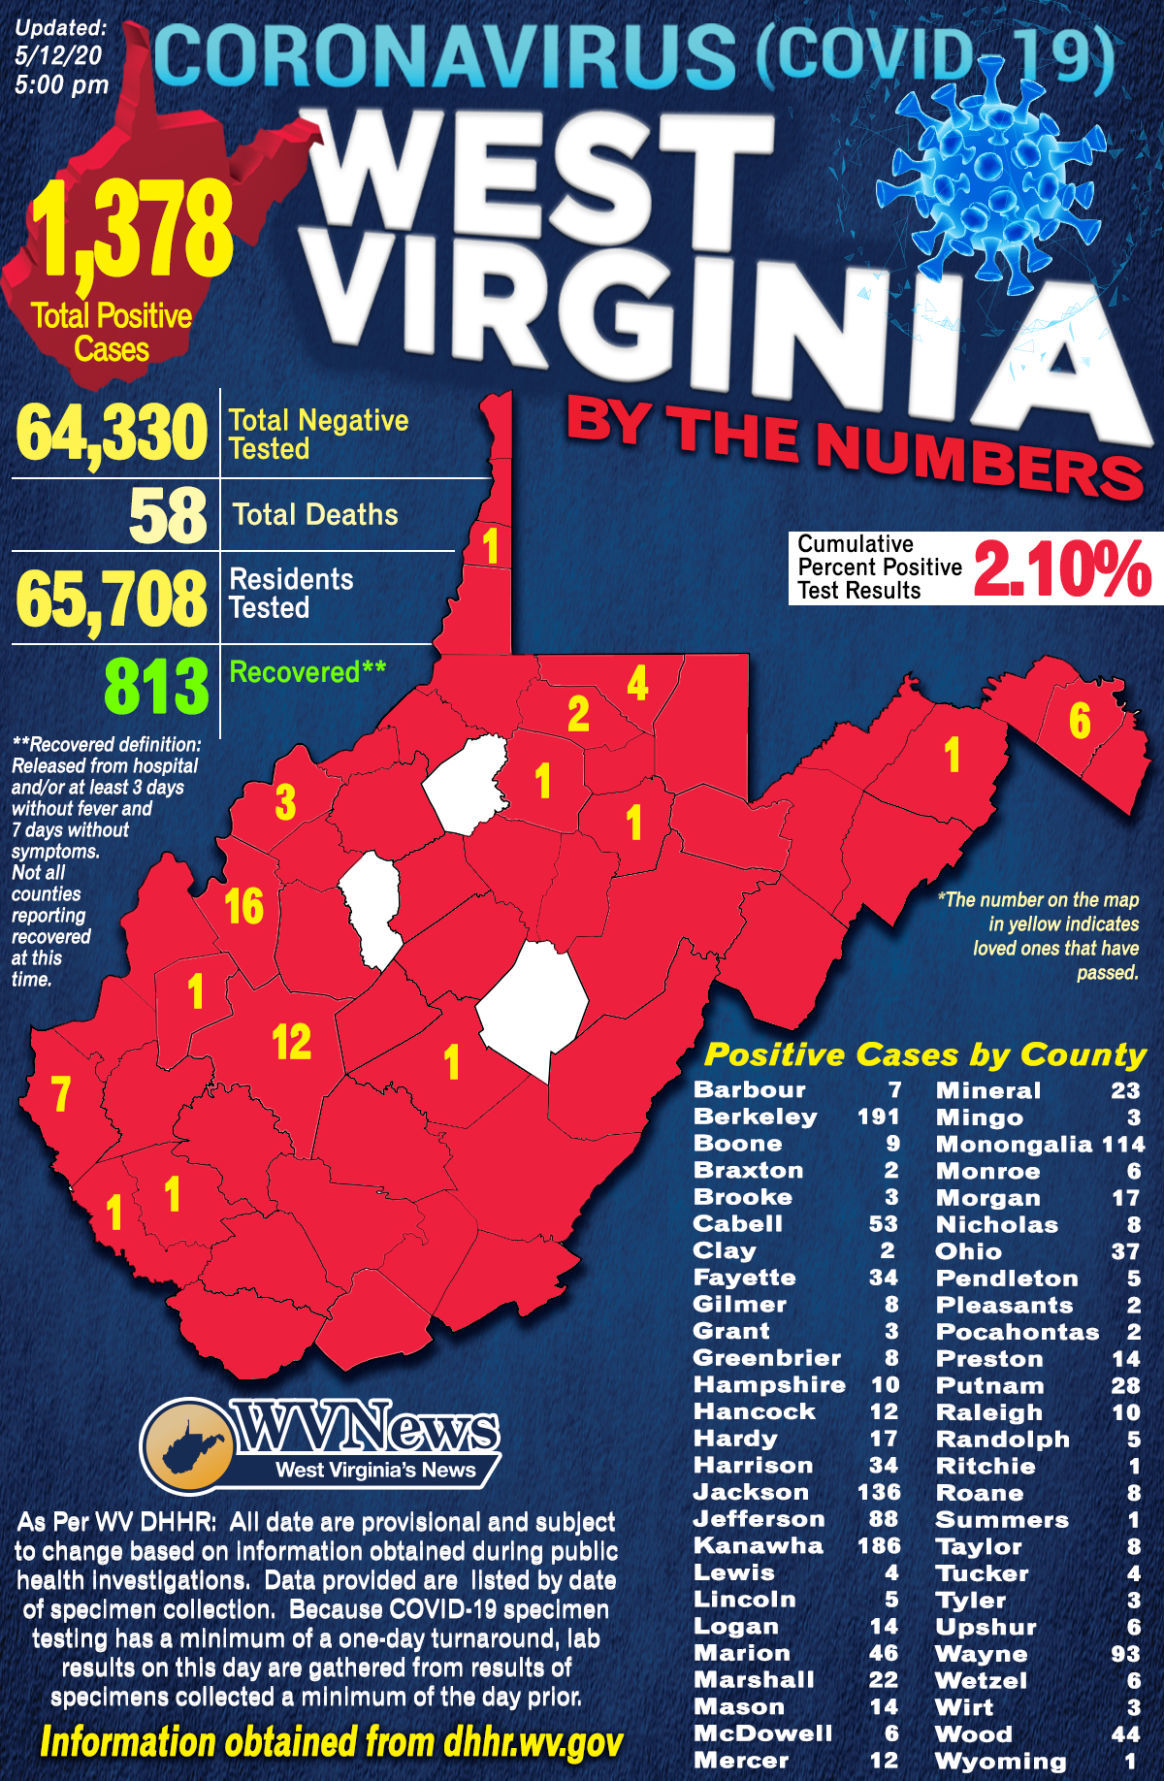 58th Covid 19 Related Death In Wv Reported Wv News Wvnews Com